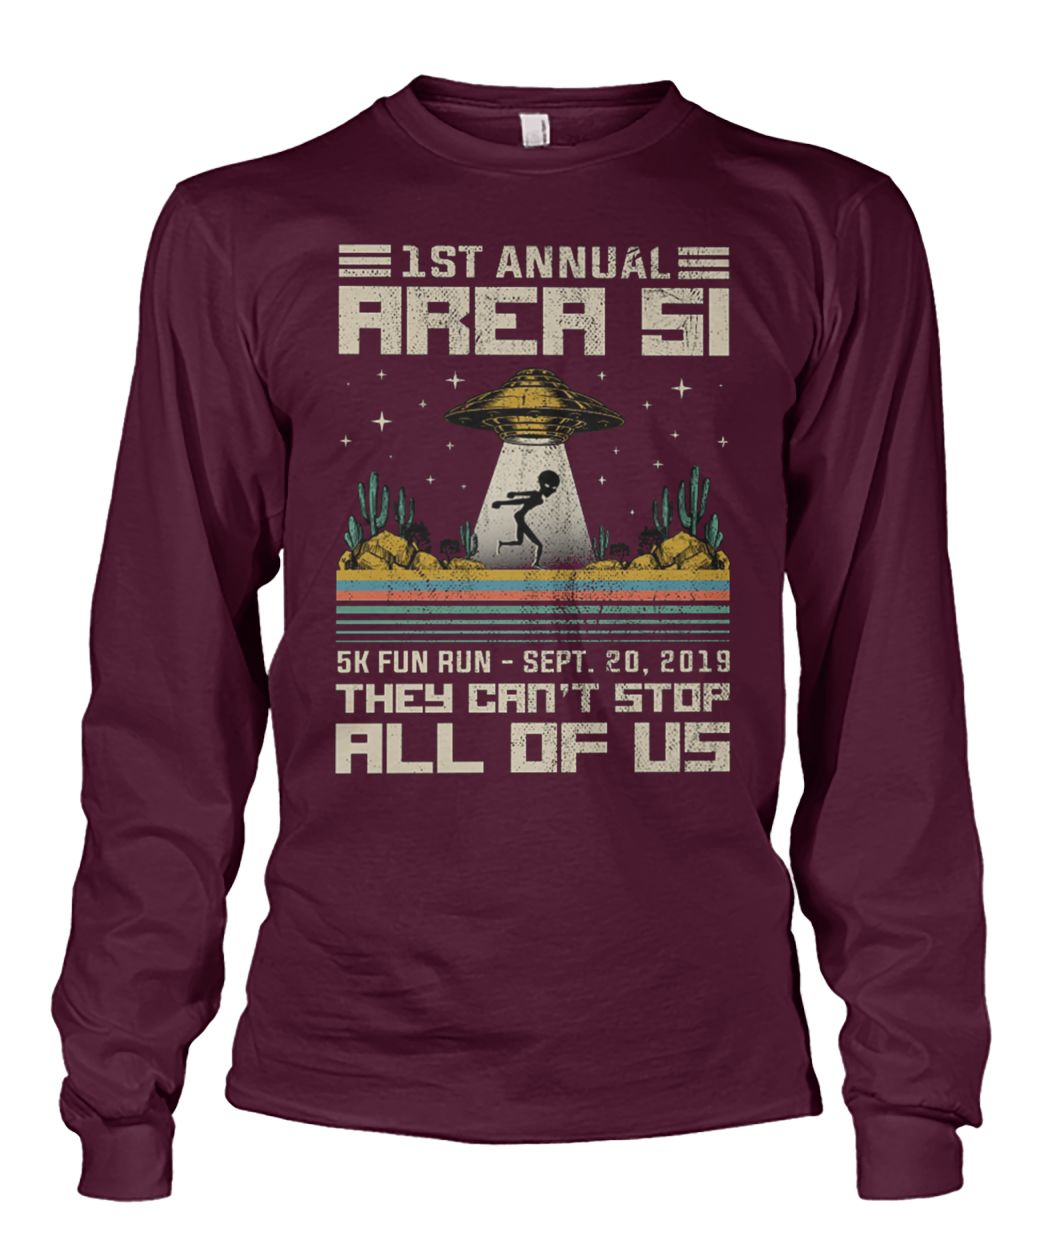 Vintage 1st annual area 51 5k fun run september 2019 they can't stop all of us unisex long sleeve